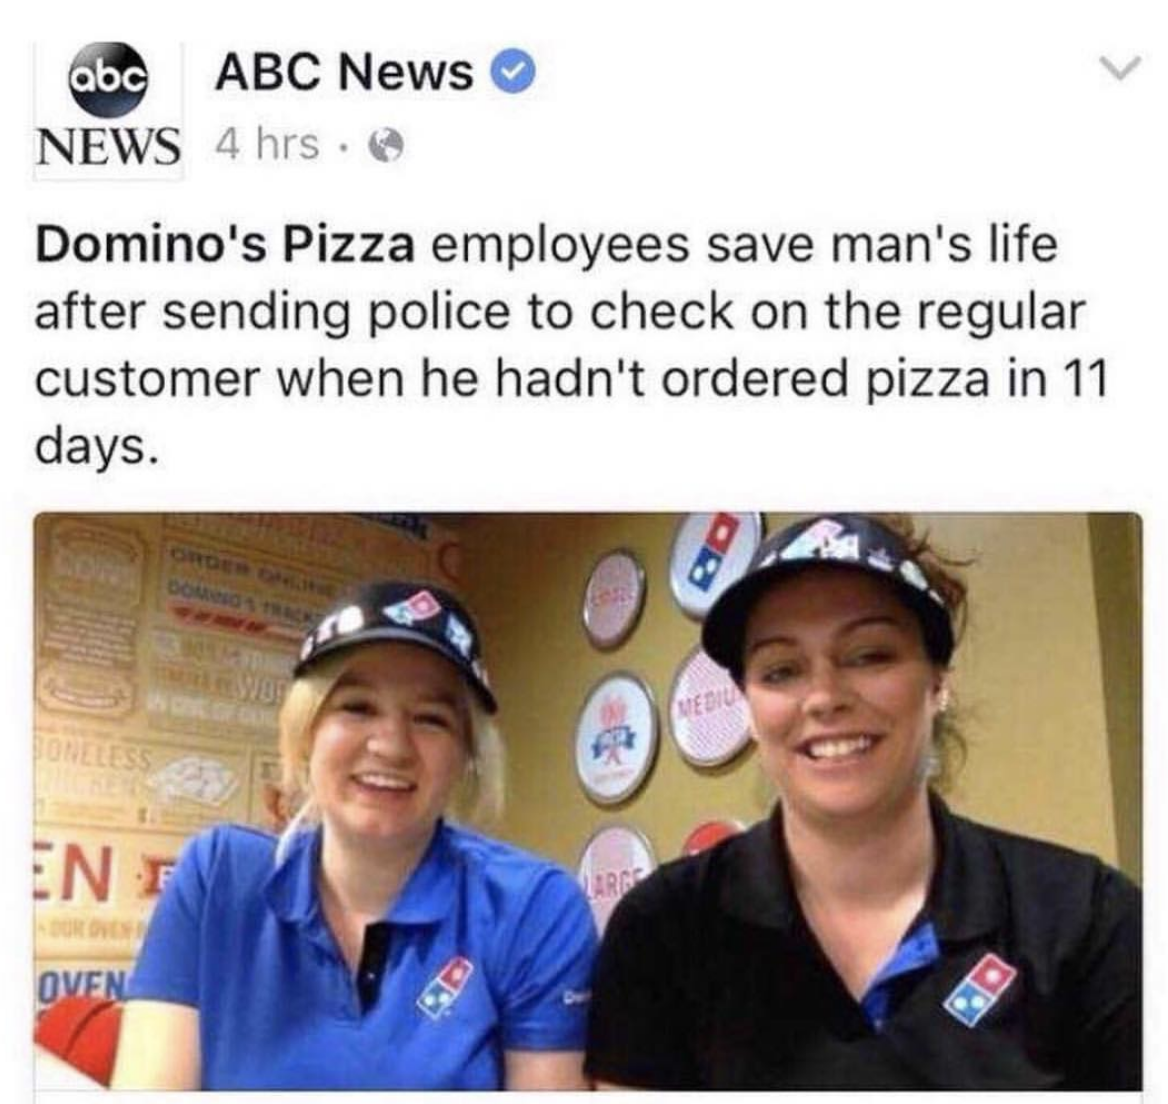 wholesome memes and pics - domino's employees - abc Abc News News 4 hrs. Domino's Pizza employees save man's life after sending police to check on the regular customer when he hadn't ordered pizza in 11 days. Boneless Ha Ros Doming'S Track En F Oven Shop 